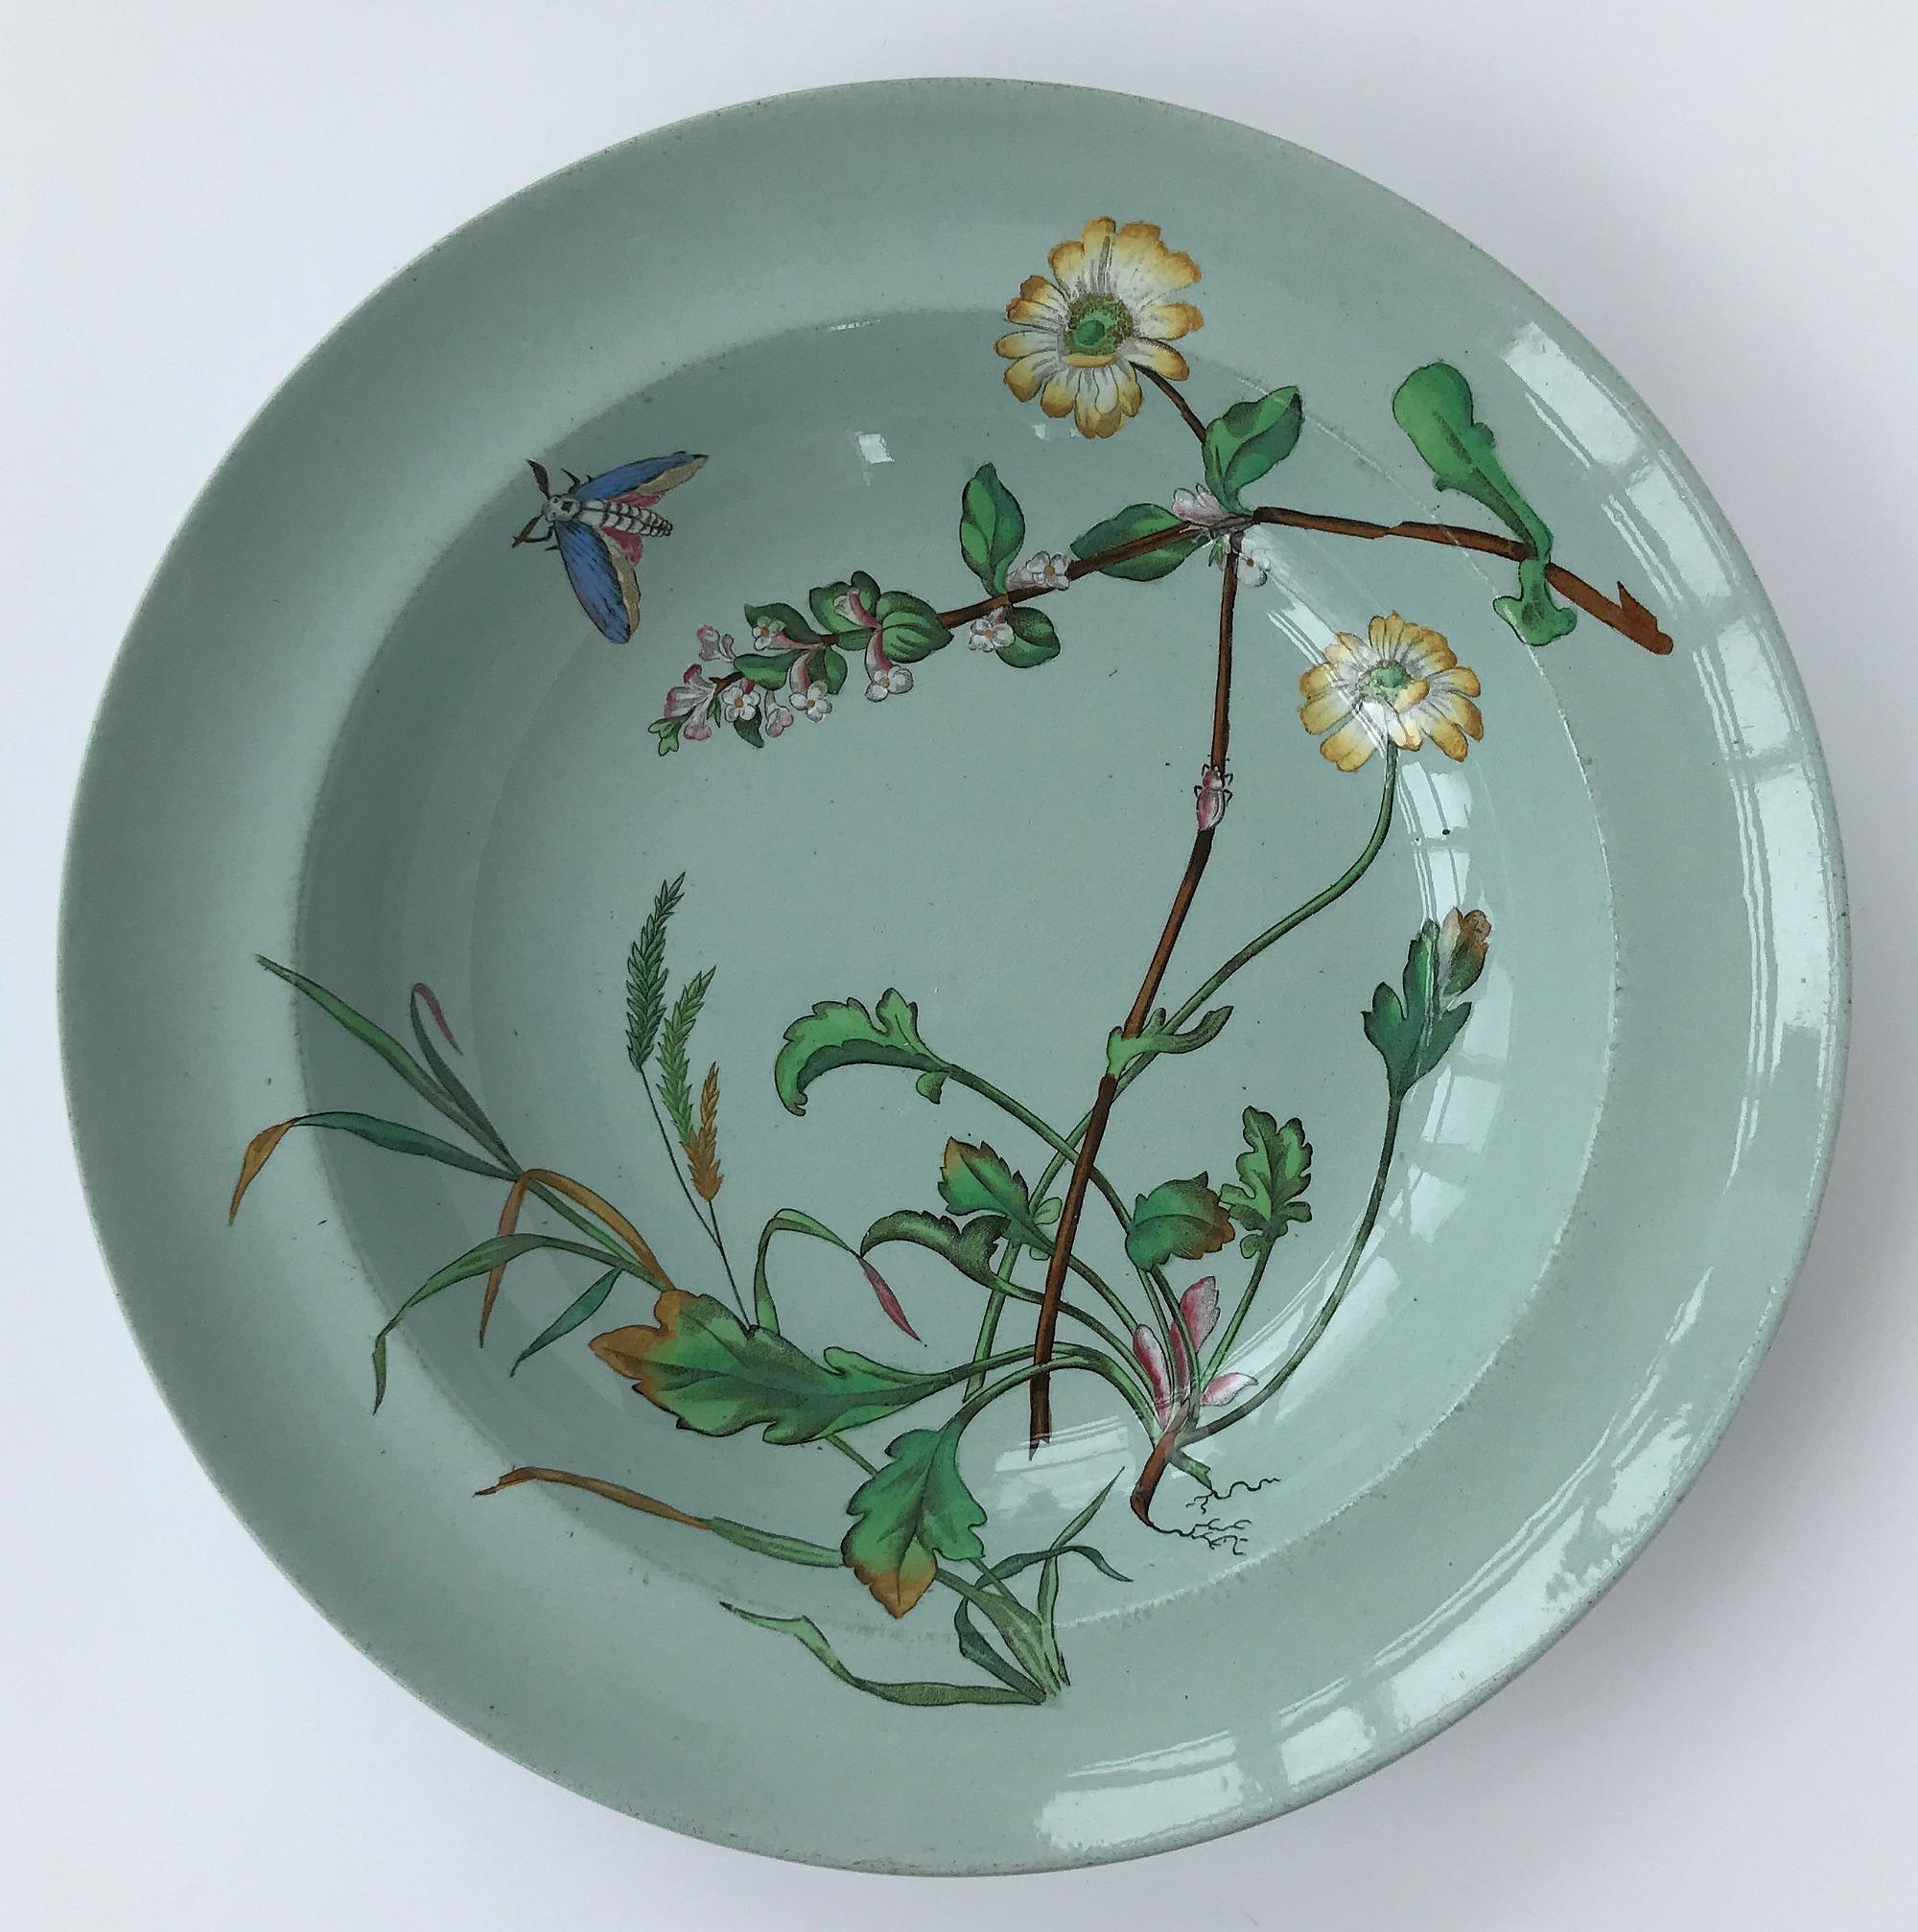 6 rare Minton celadon aesthetic movement botanical soup bowls, circa 1878, decorated with sprays of wild flowers and butterflies in polychrome enamels. Each bowl has different plants and composition.
All six are in excellent condition, no damage,